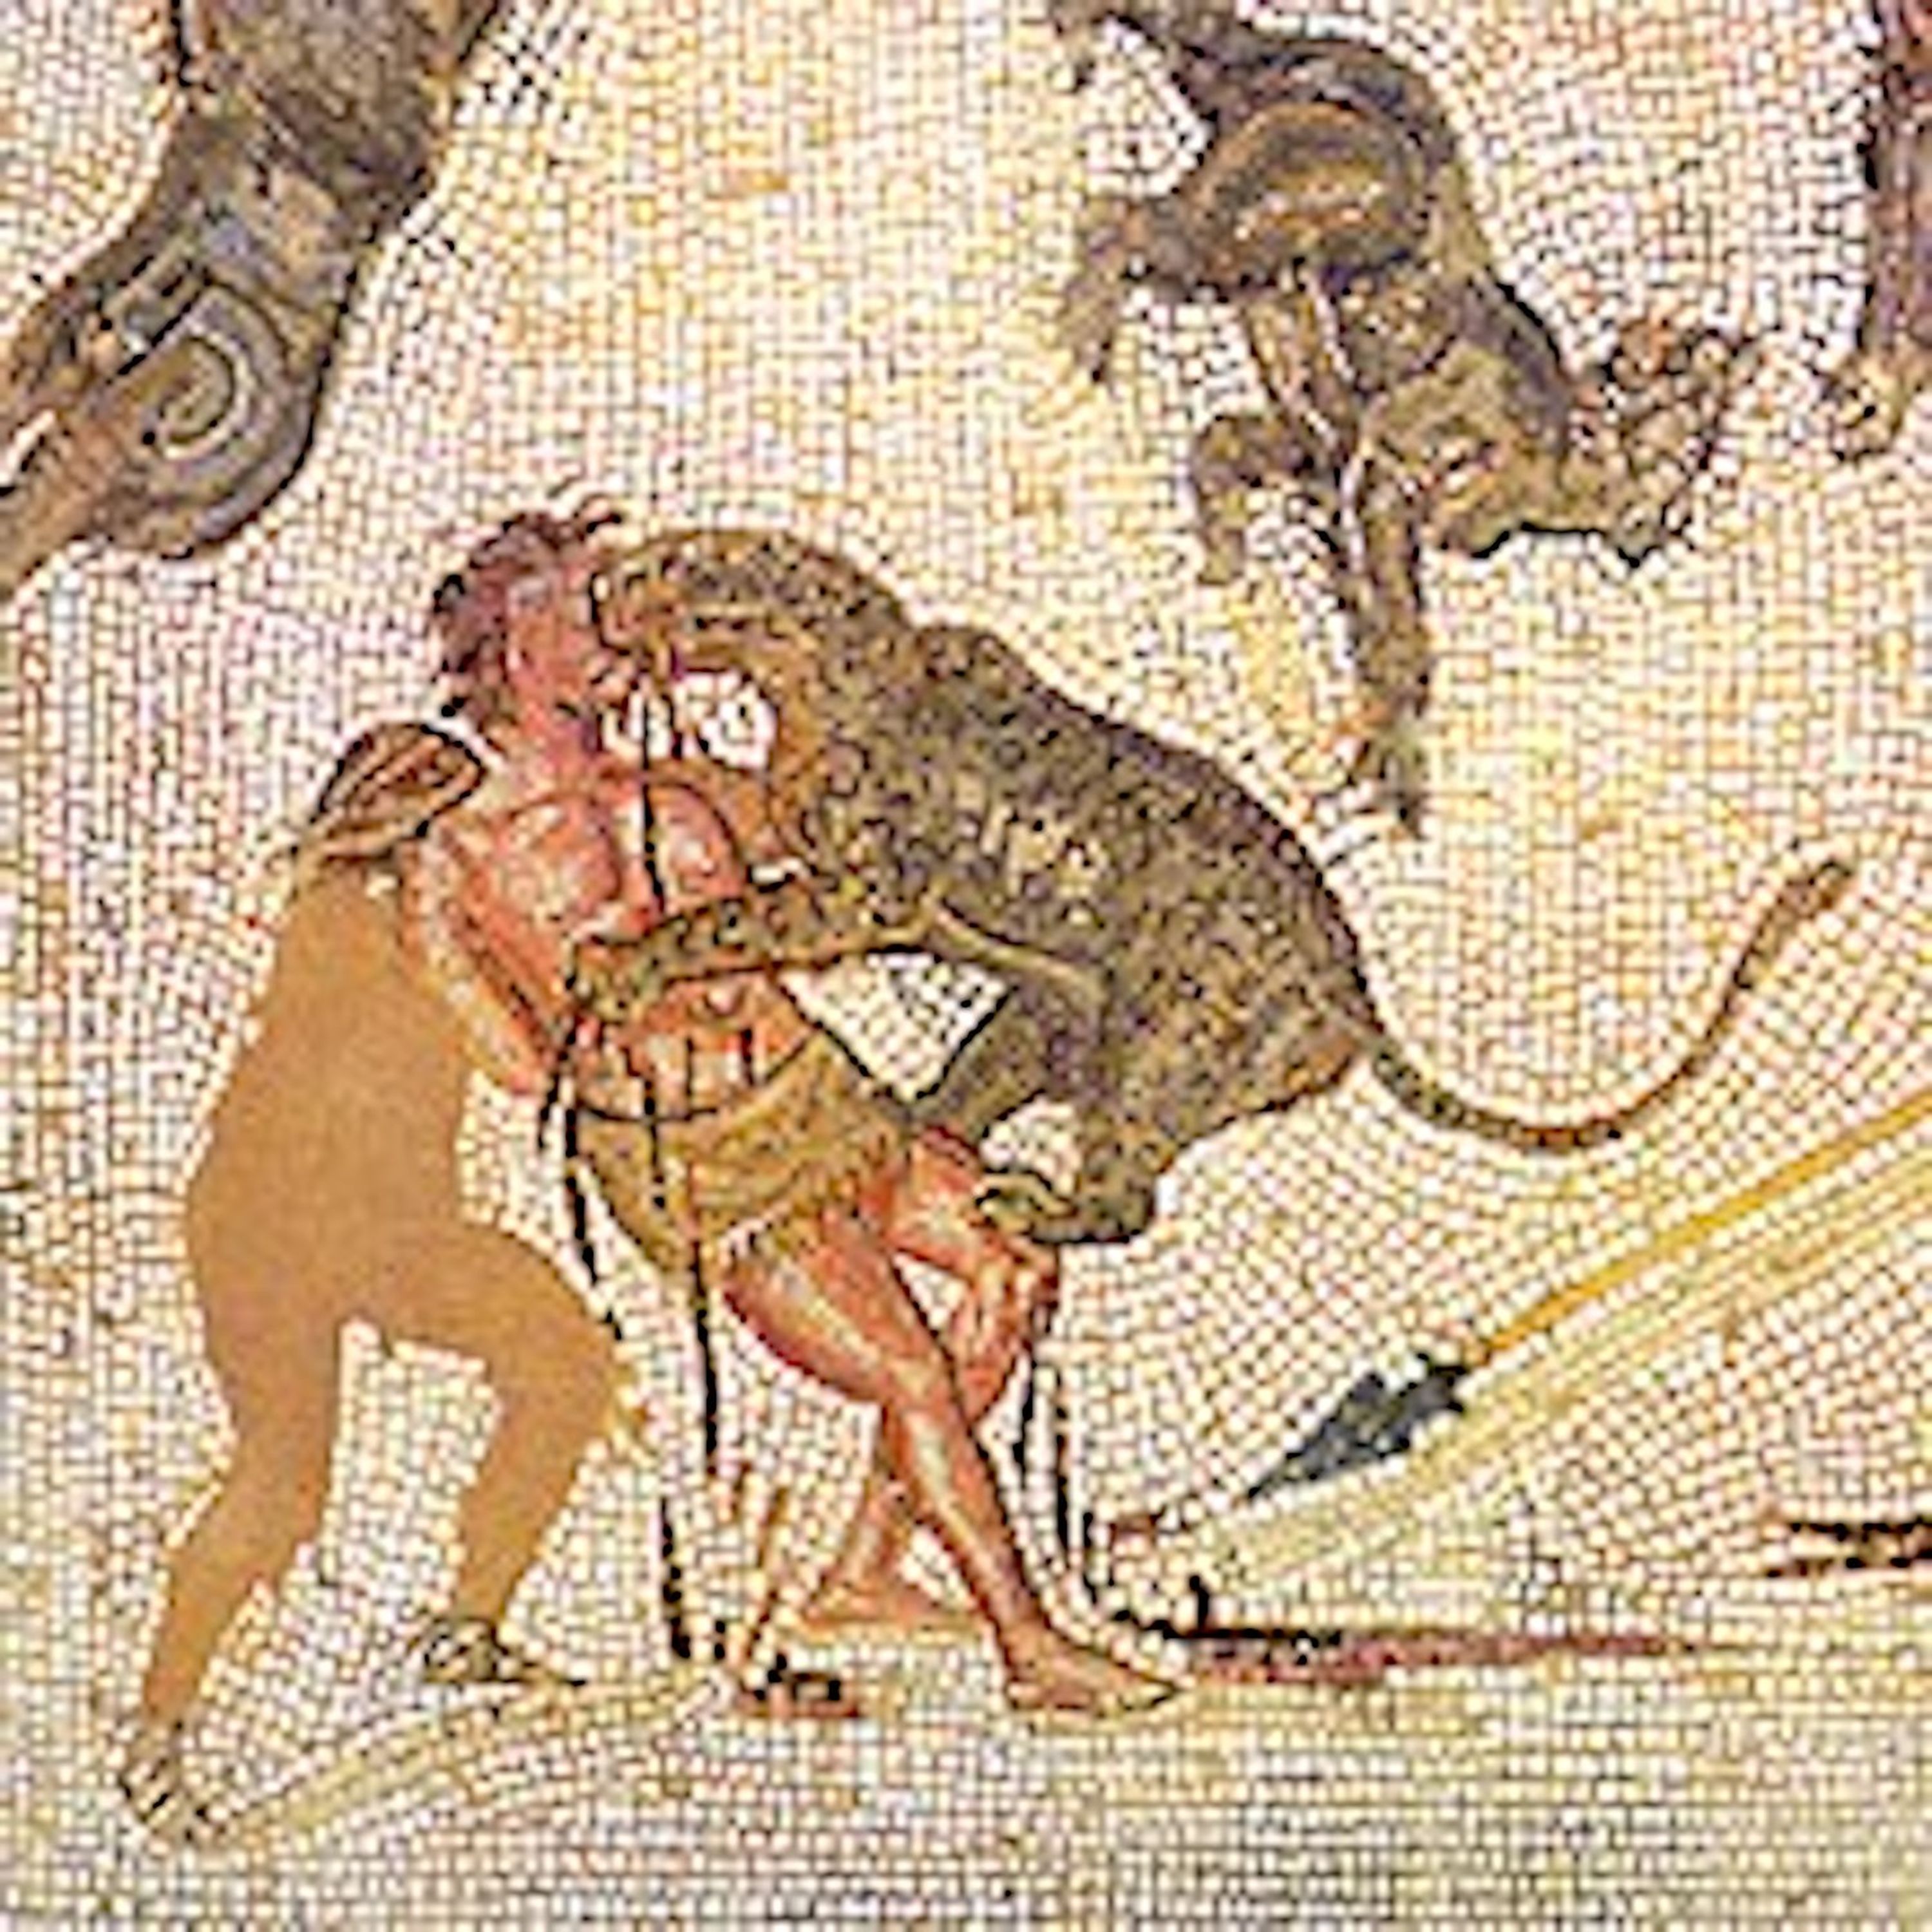 Animal Games in Ancient Rome